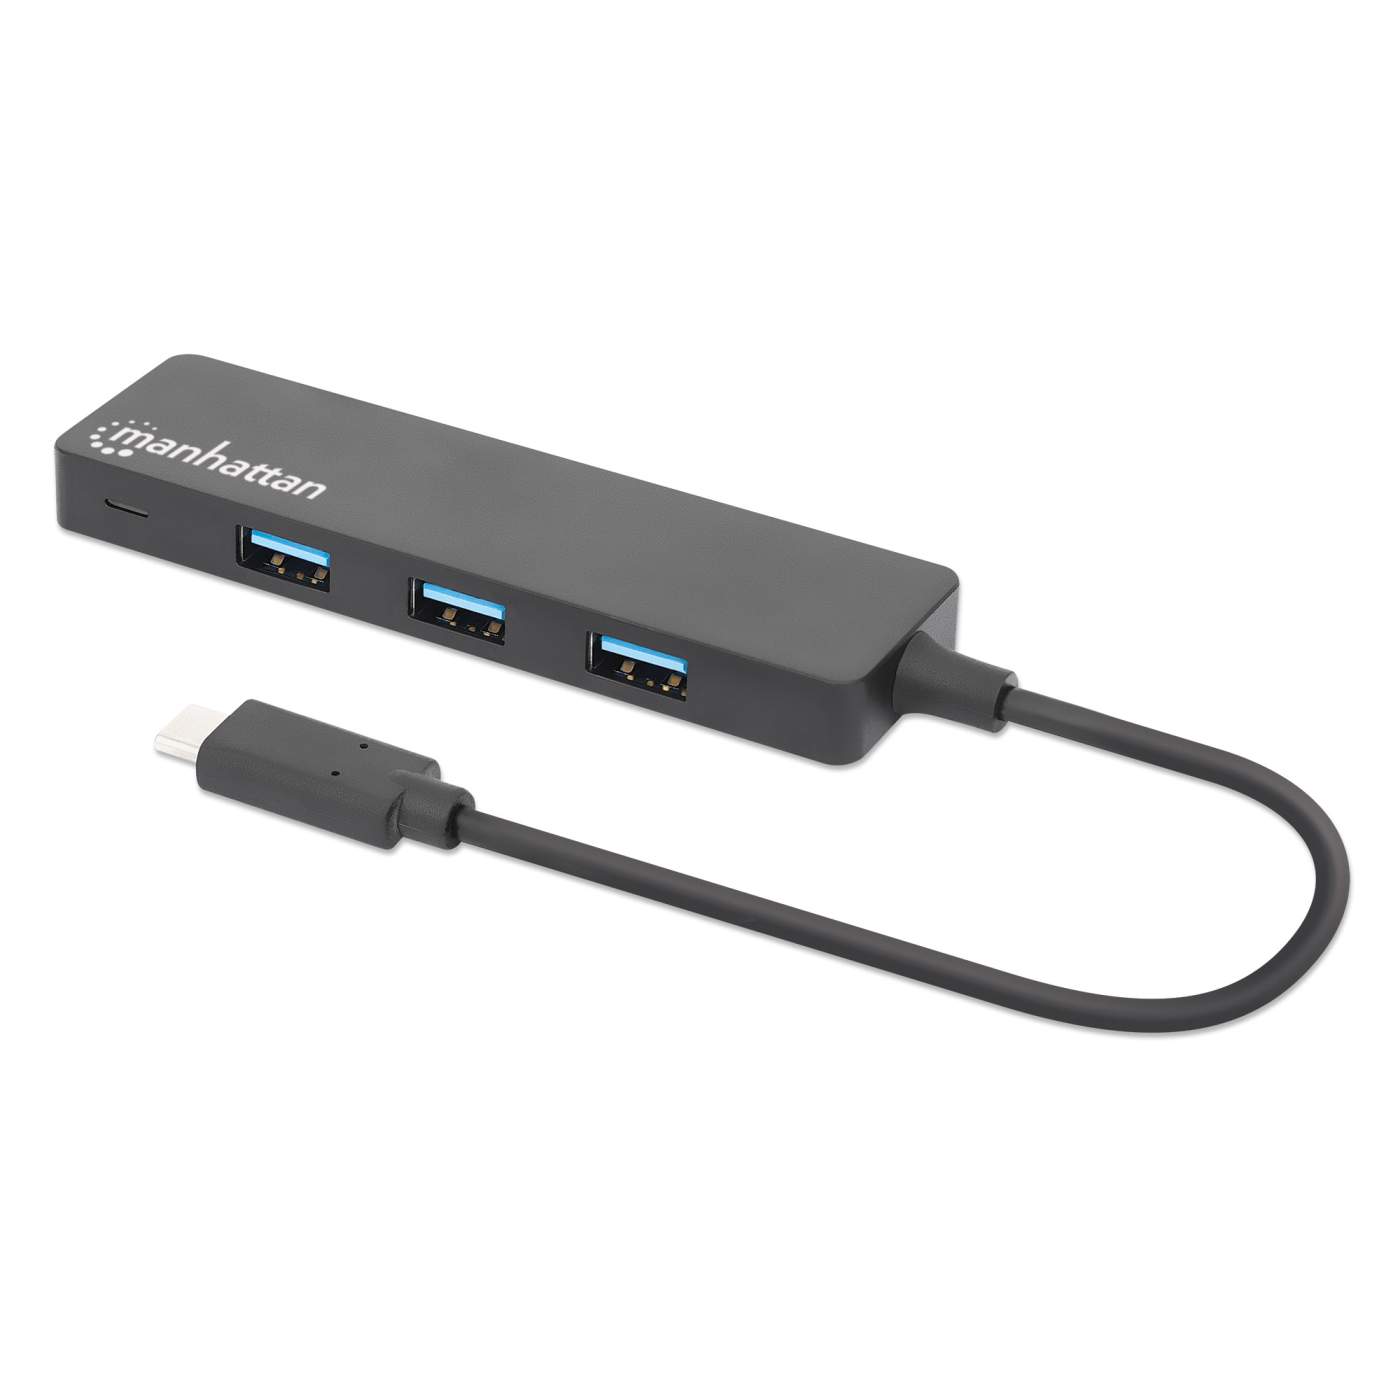 CABLETIME 4 port USB A 3.0 hub superspeed 5Gbps with Power Supply